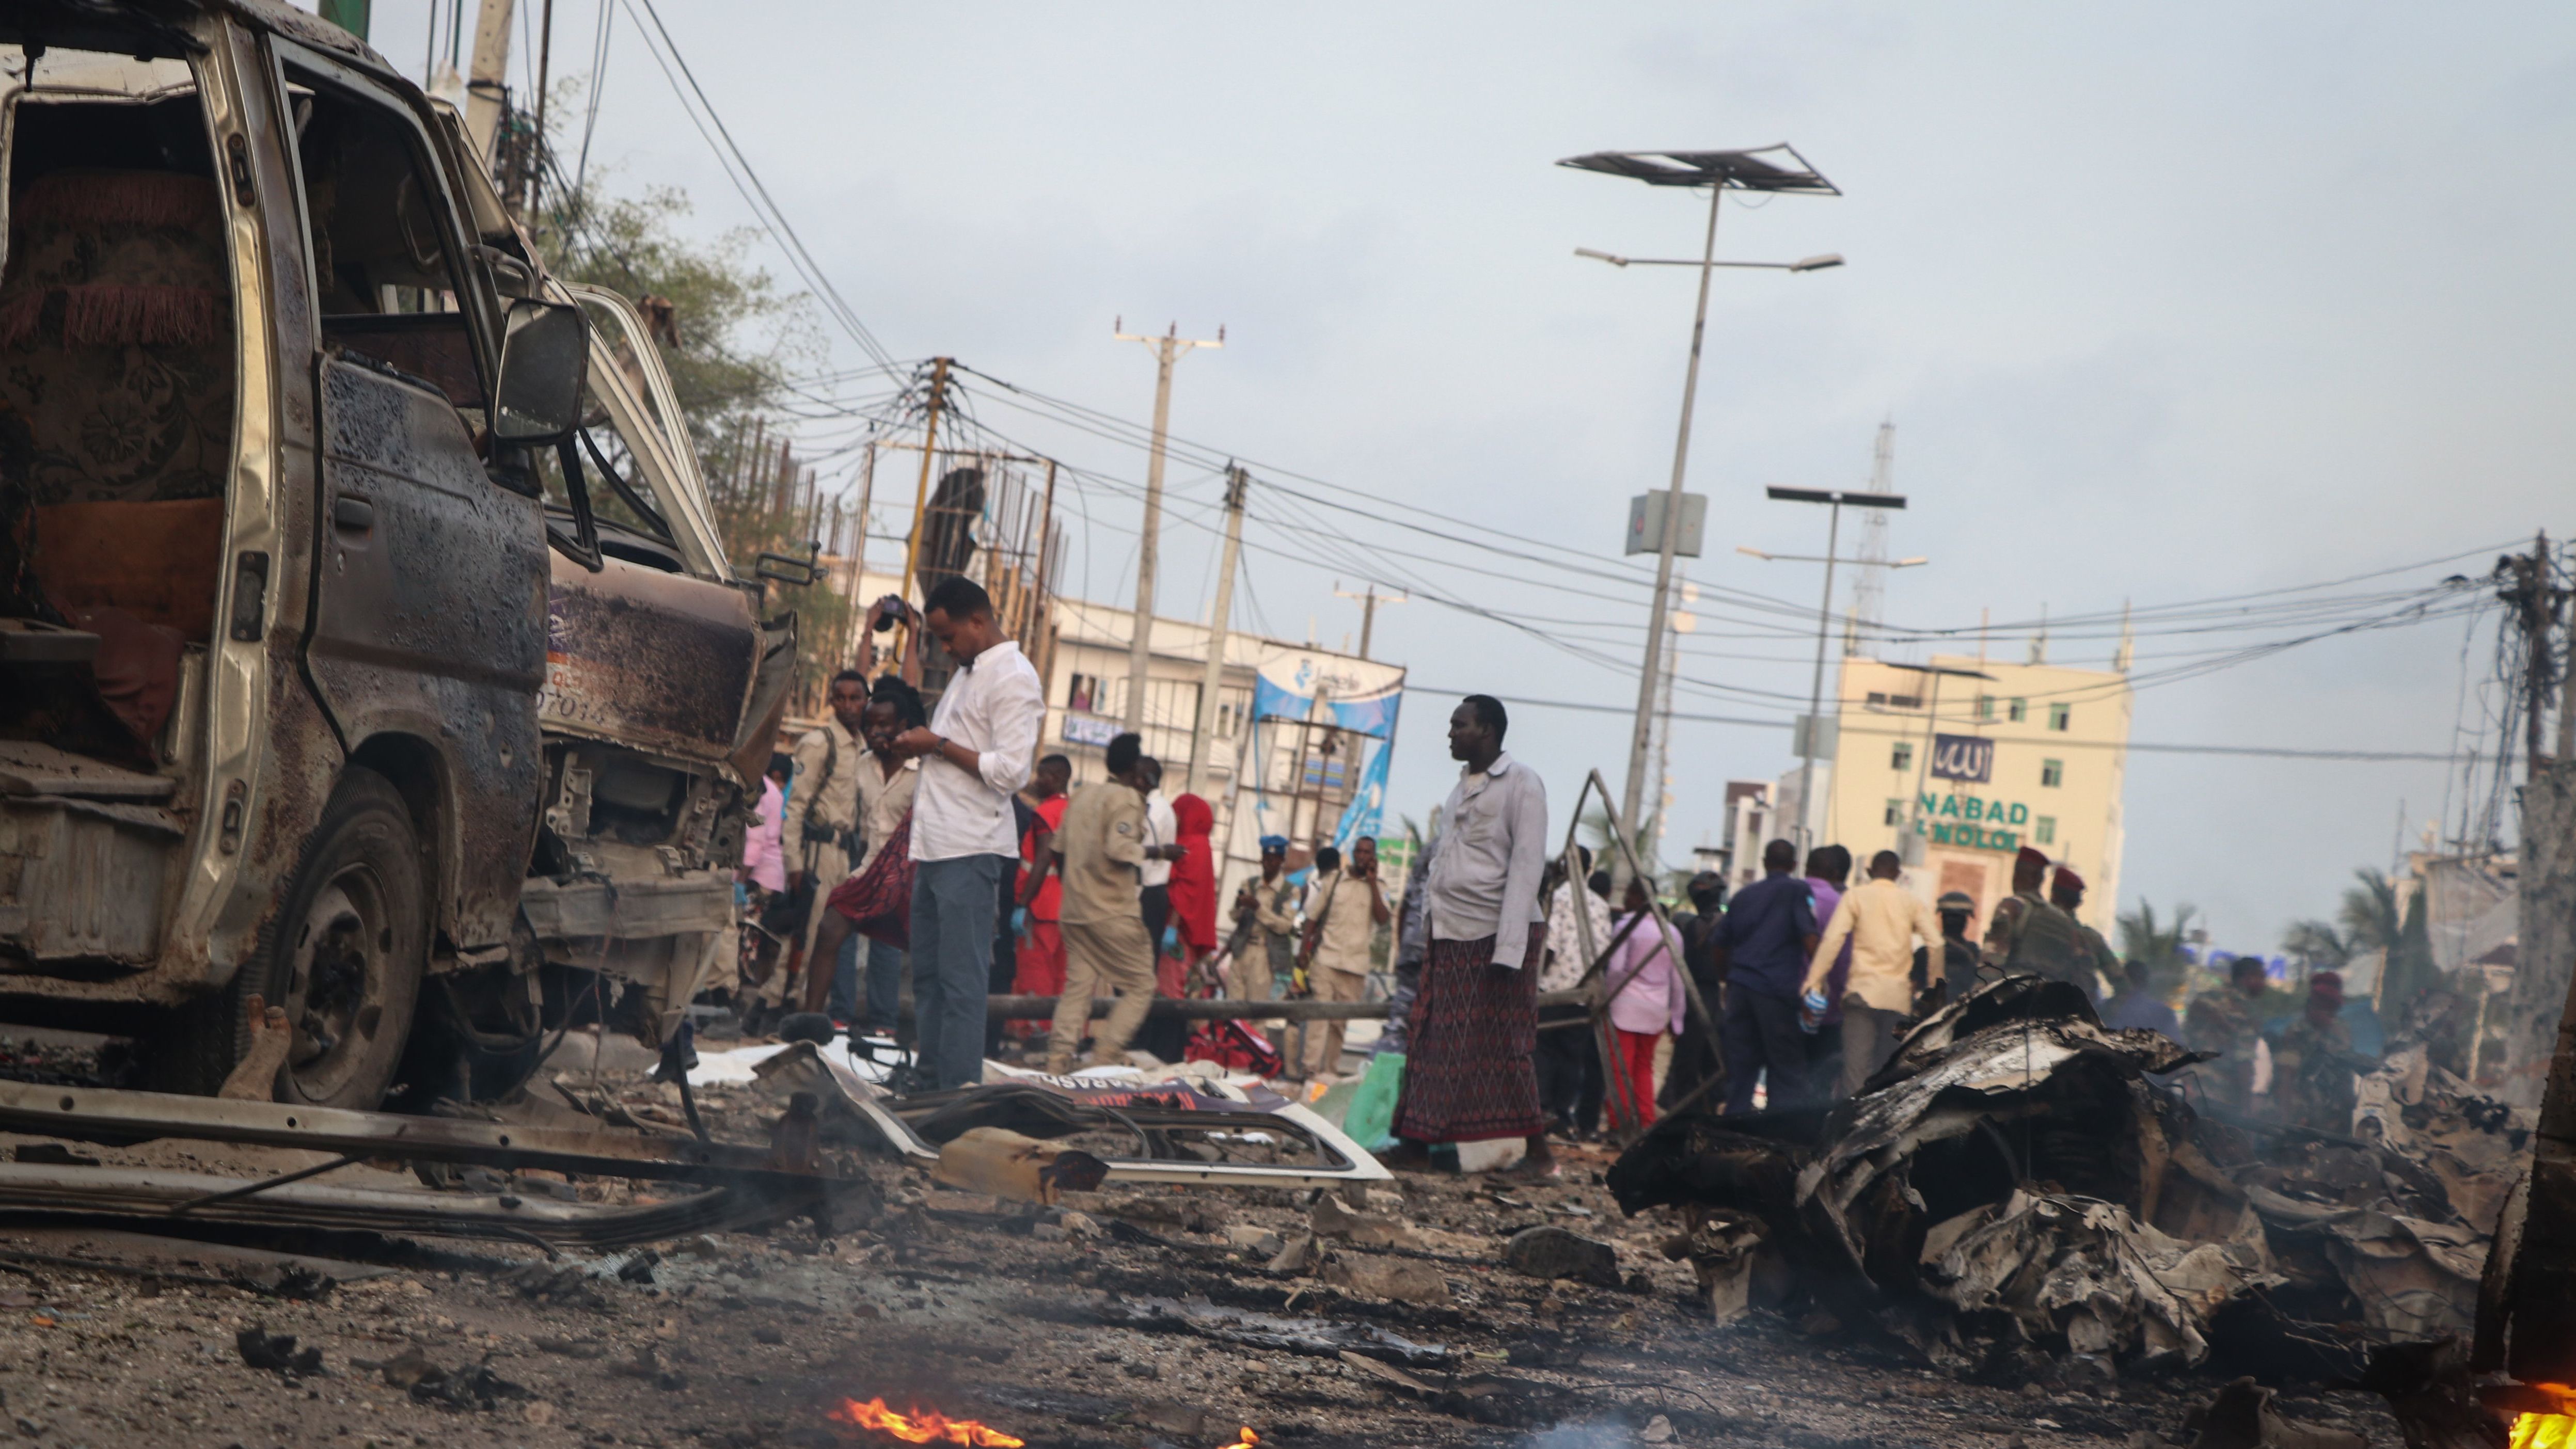 People gather in the street amid wreckage from car bombings in Mogadishu, Somalia.